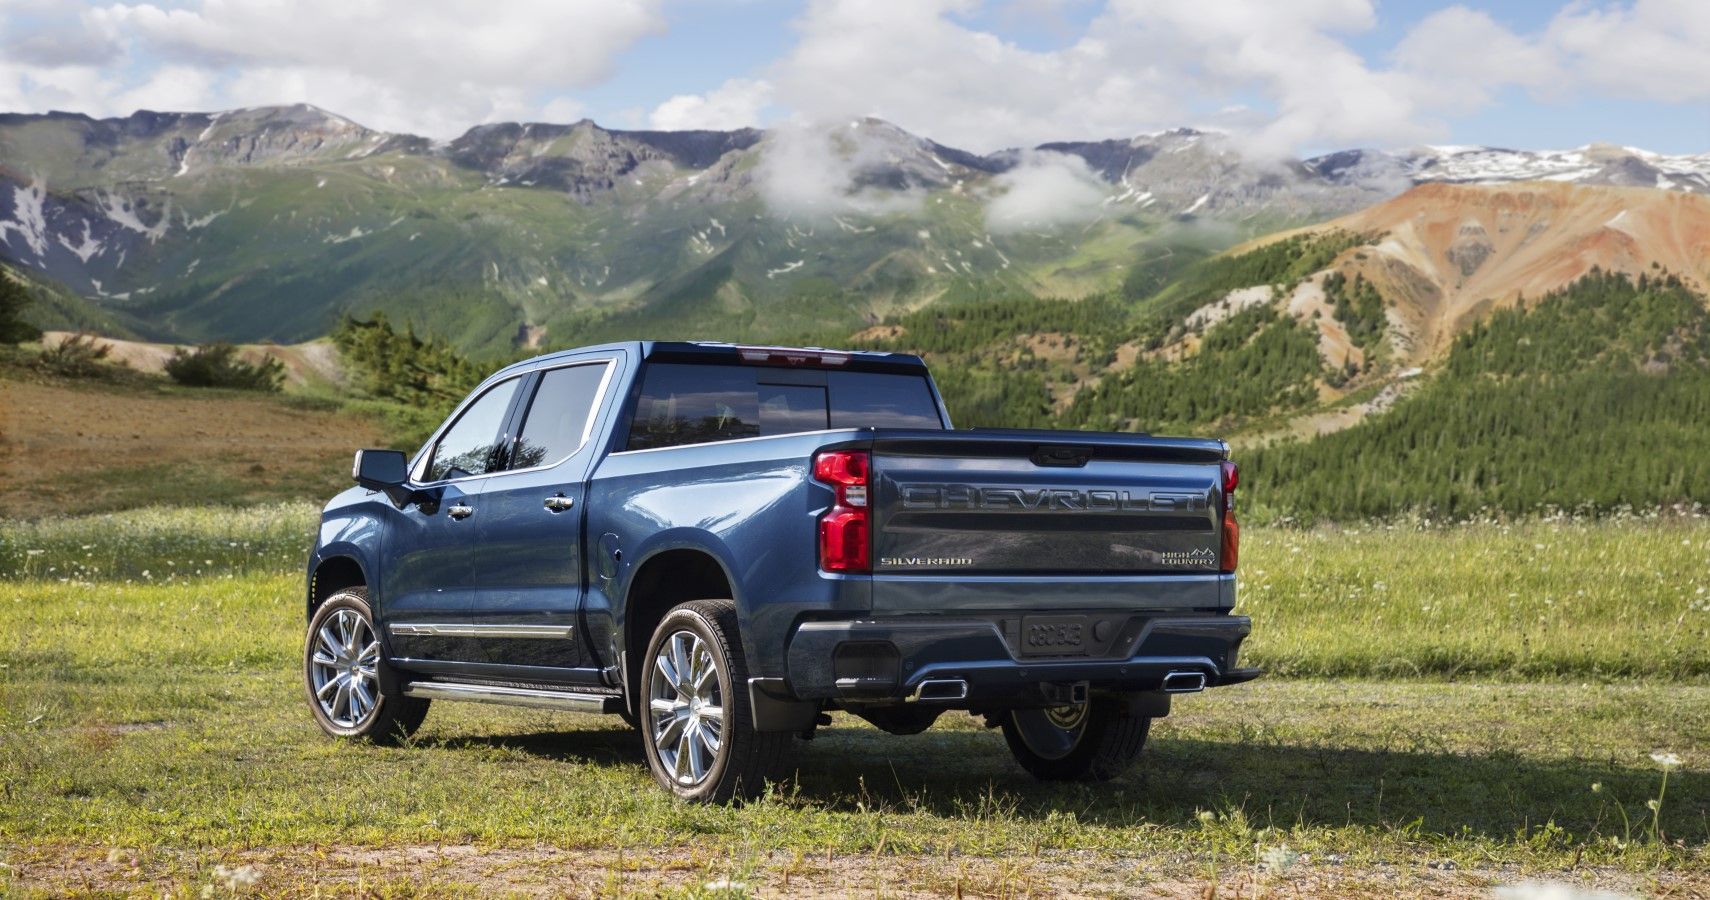 Blue 2022 Chevrolet Silverado 1500 Parked In the Countryside